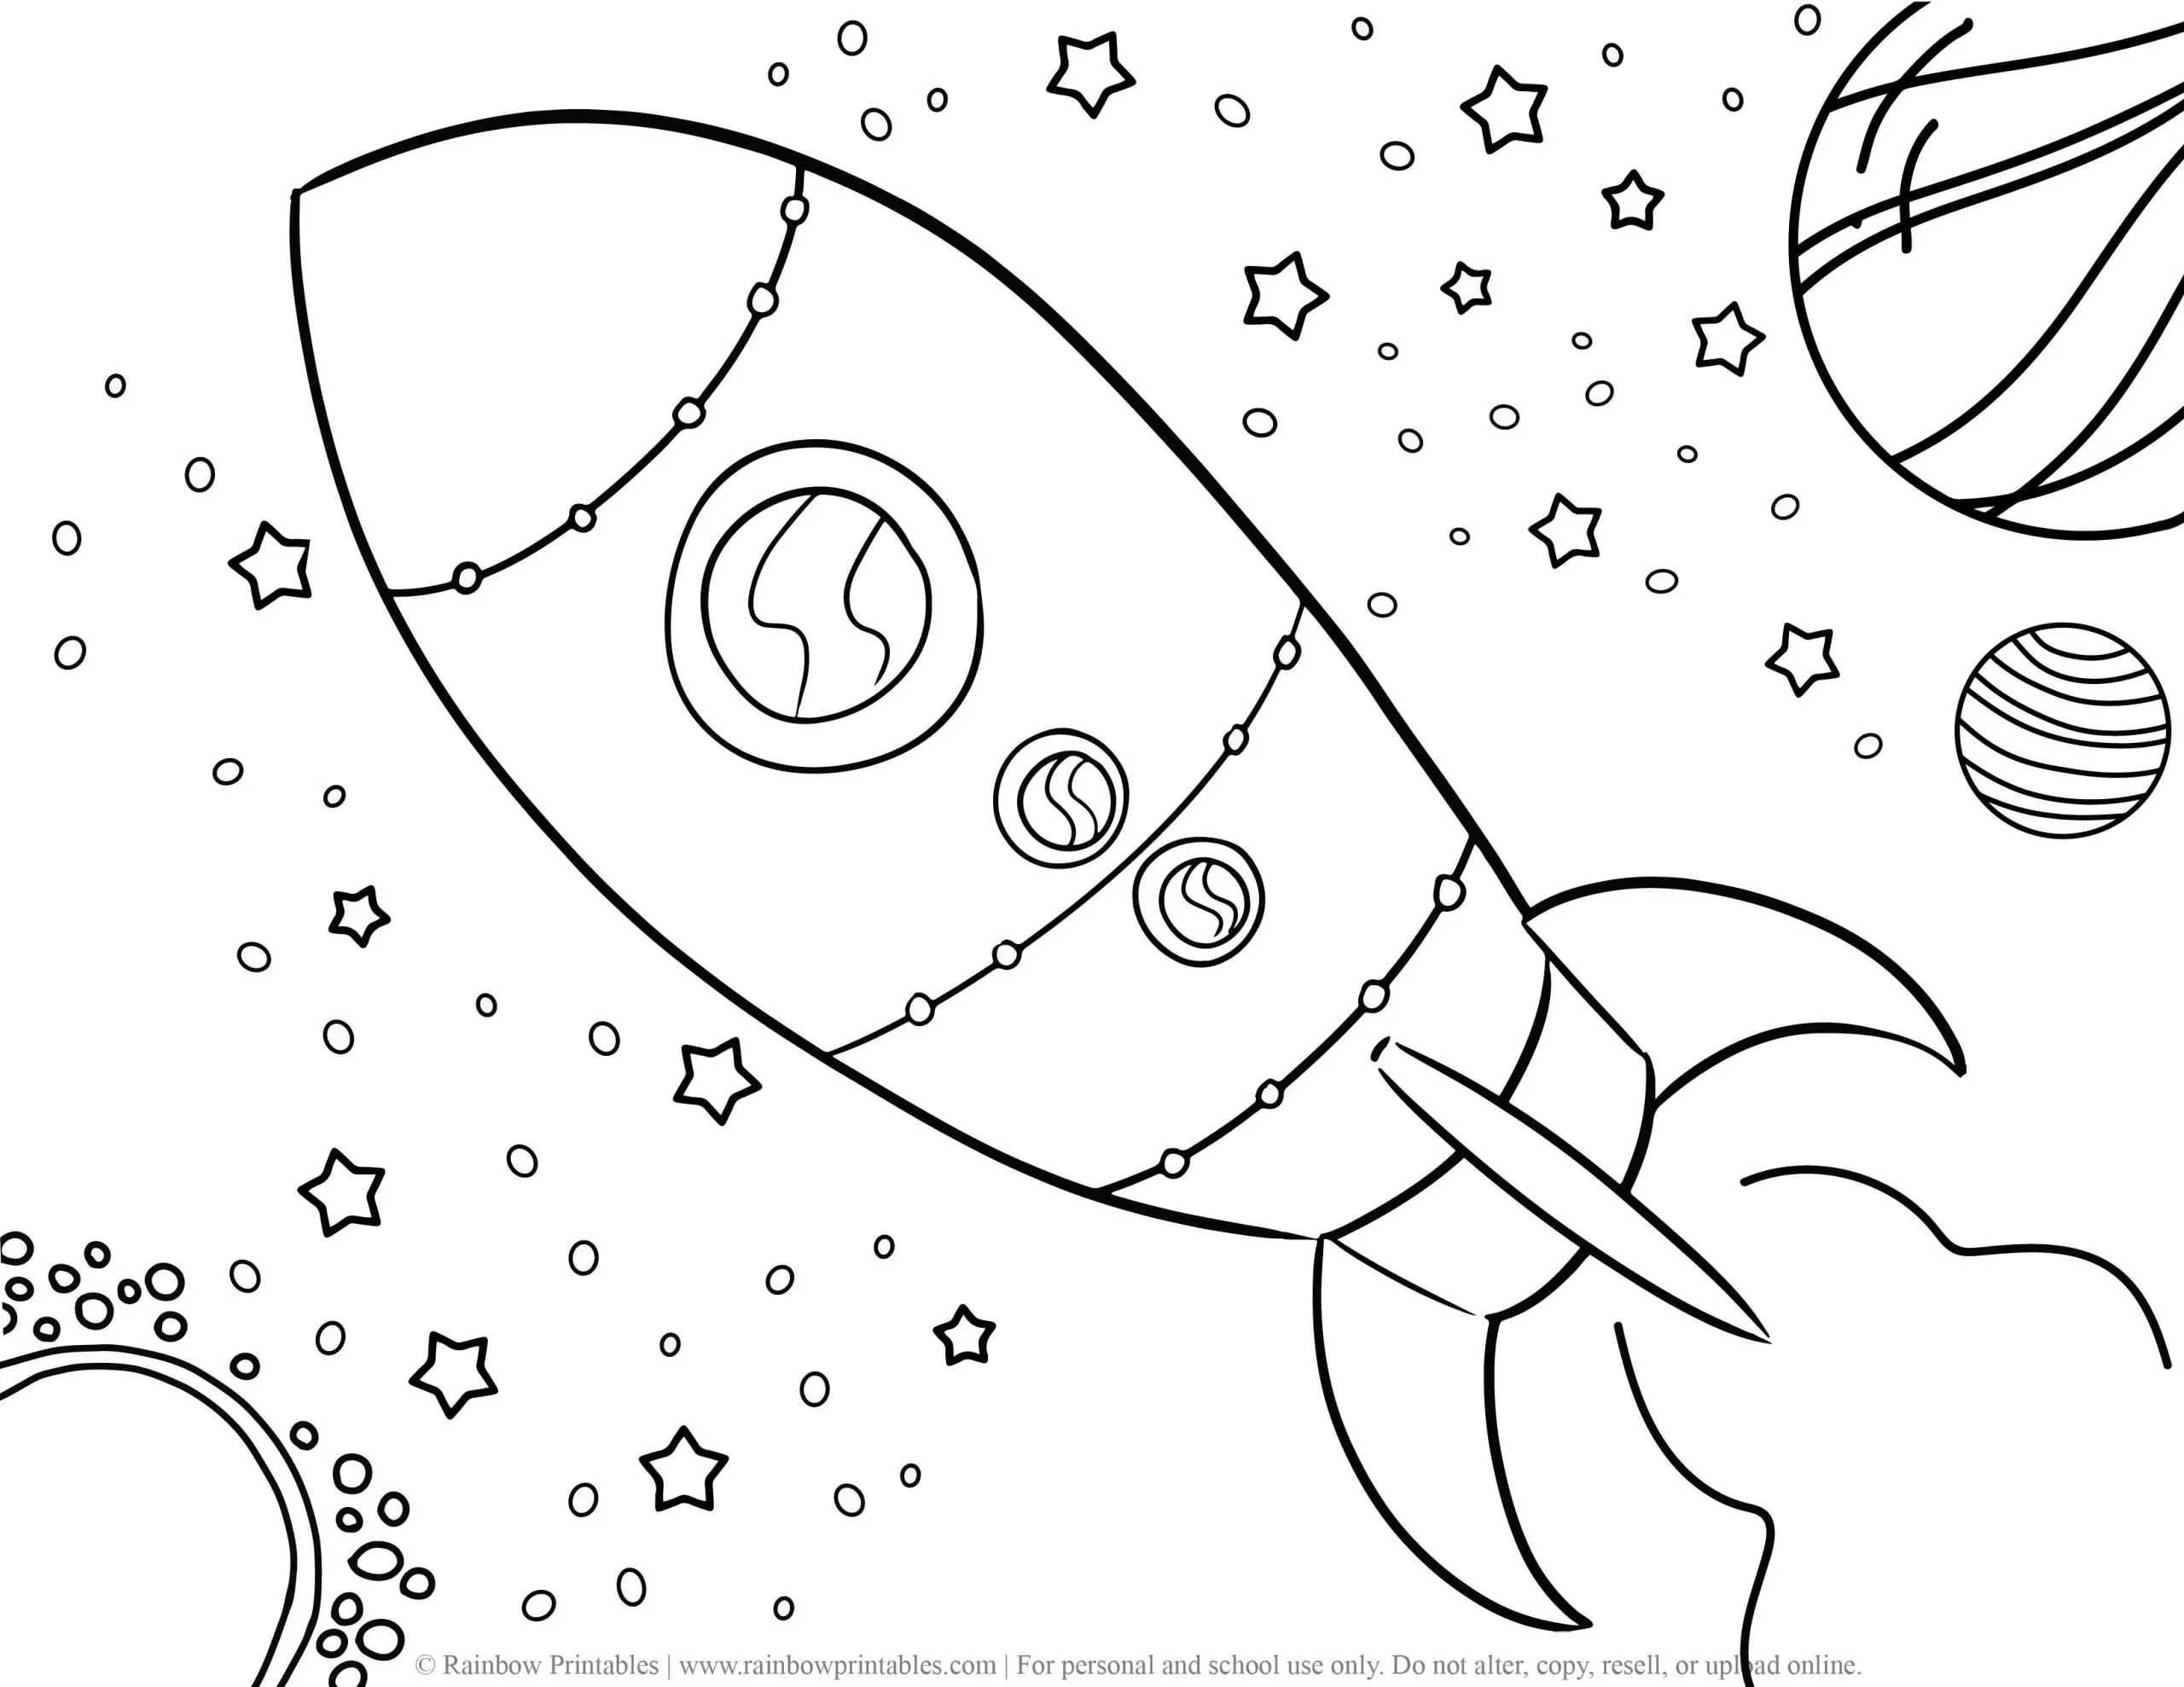 Rocket Ship Doodle Space Galaxy Planets Outerspace Coloring Page